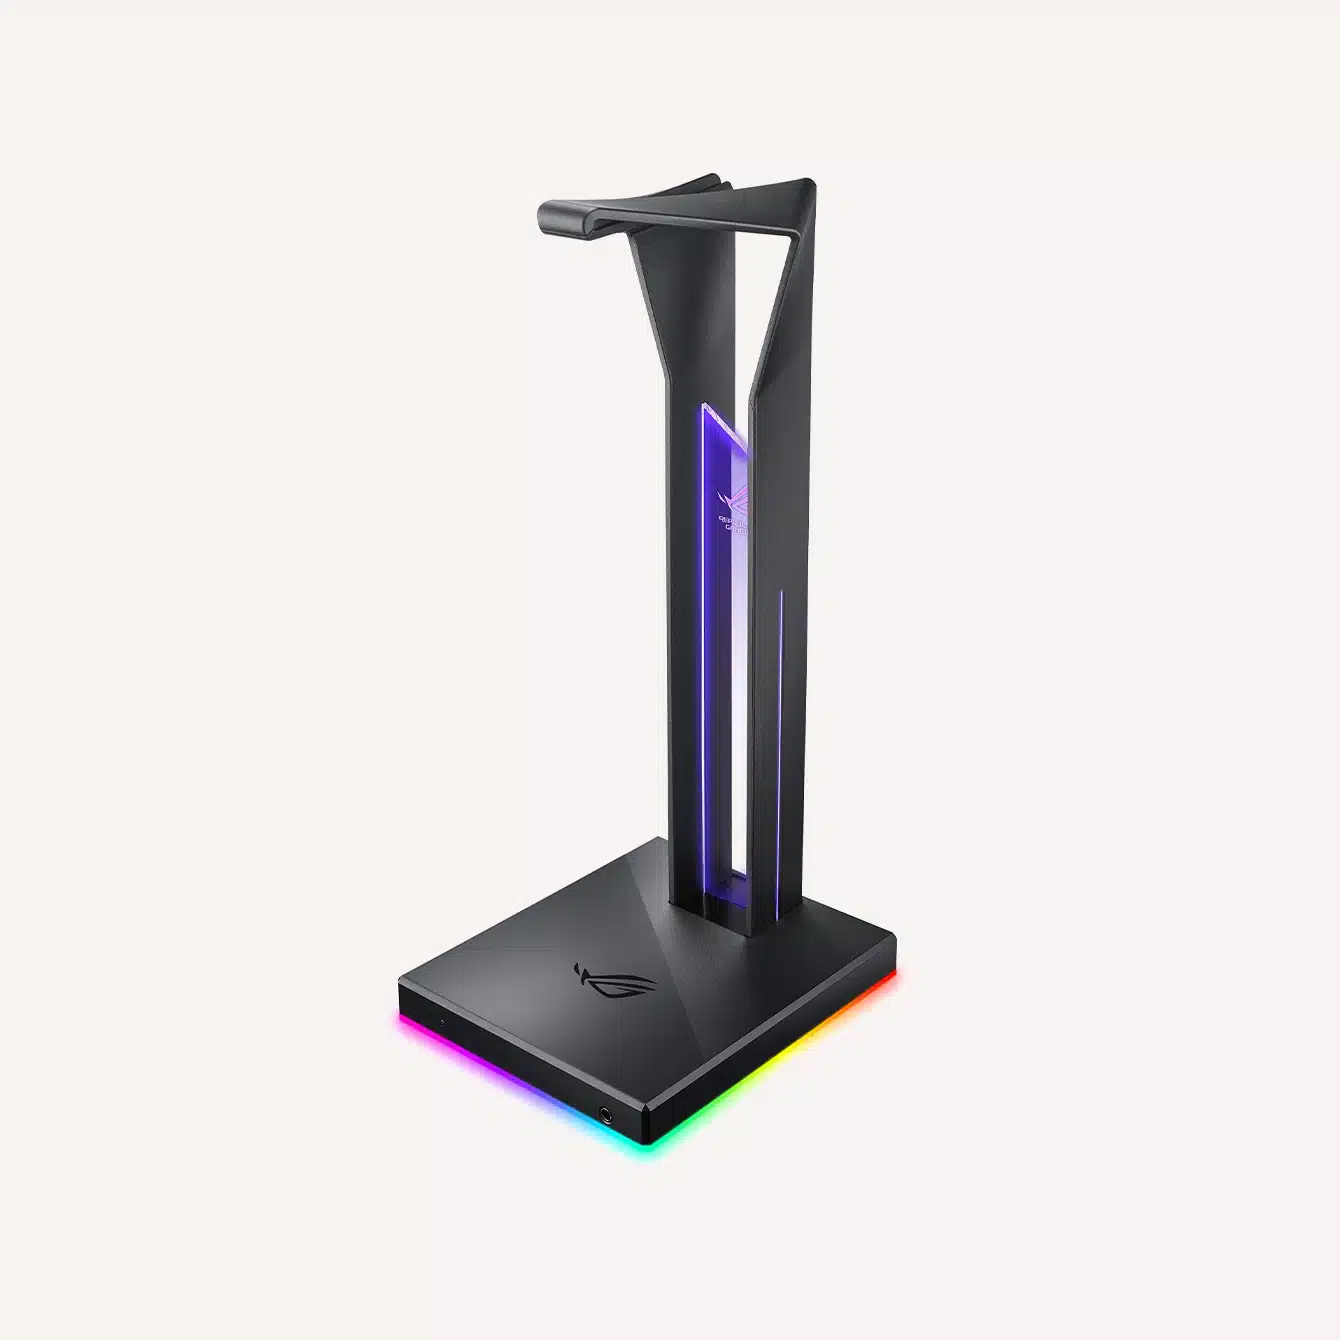 ASUS Rog Throne Headset Stand